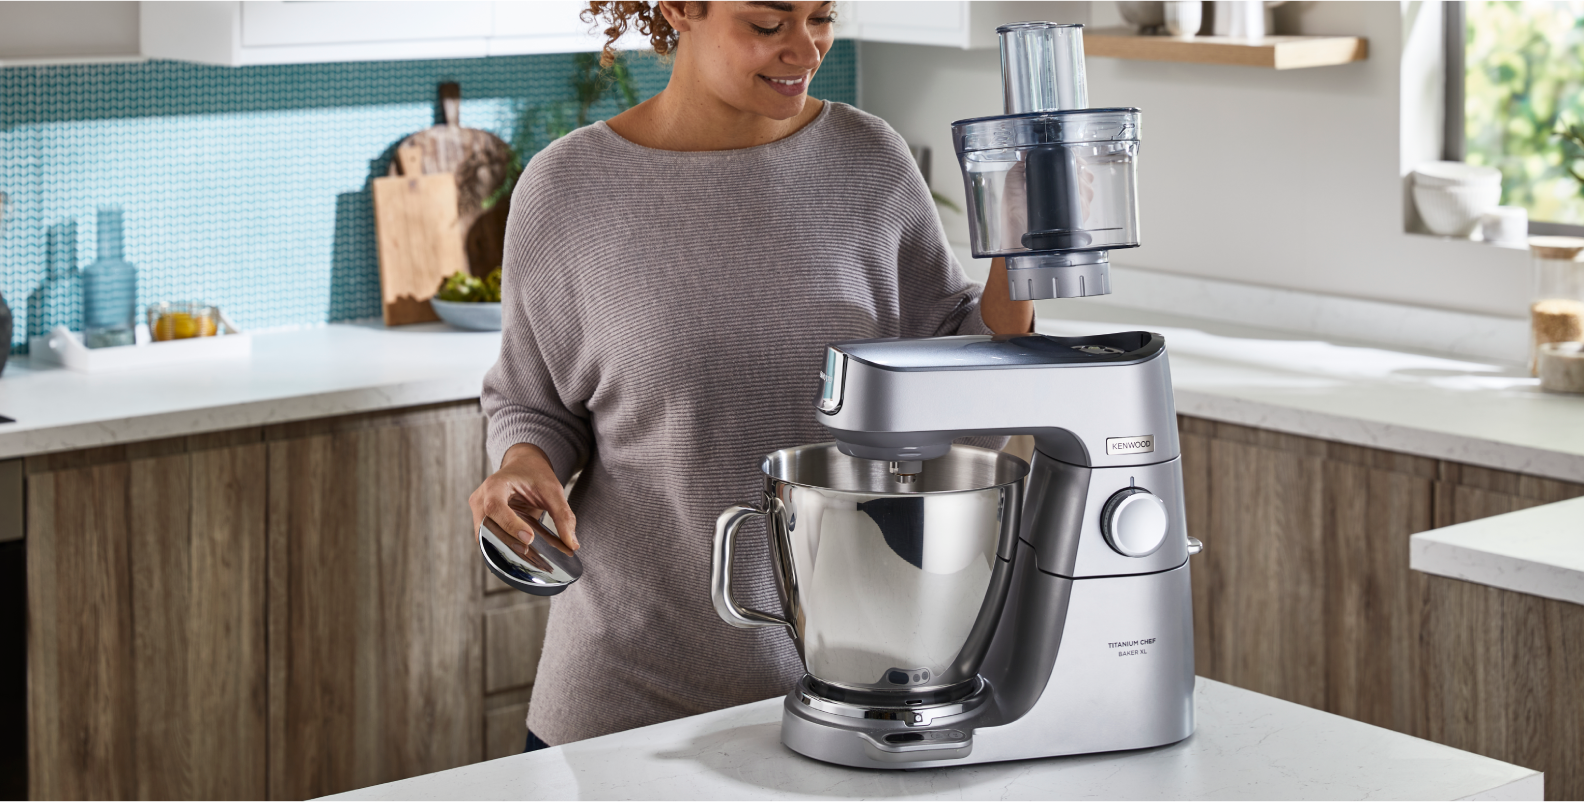 5 attachments to use with your Kenwood stand mixer | Kenwood International